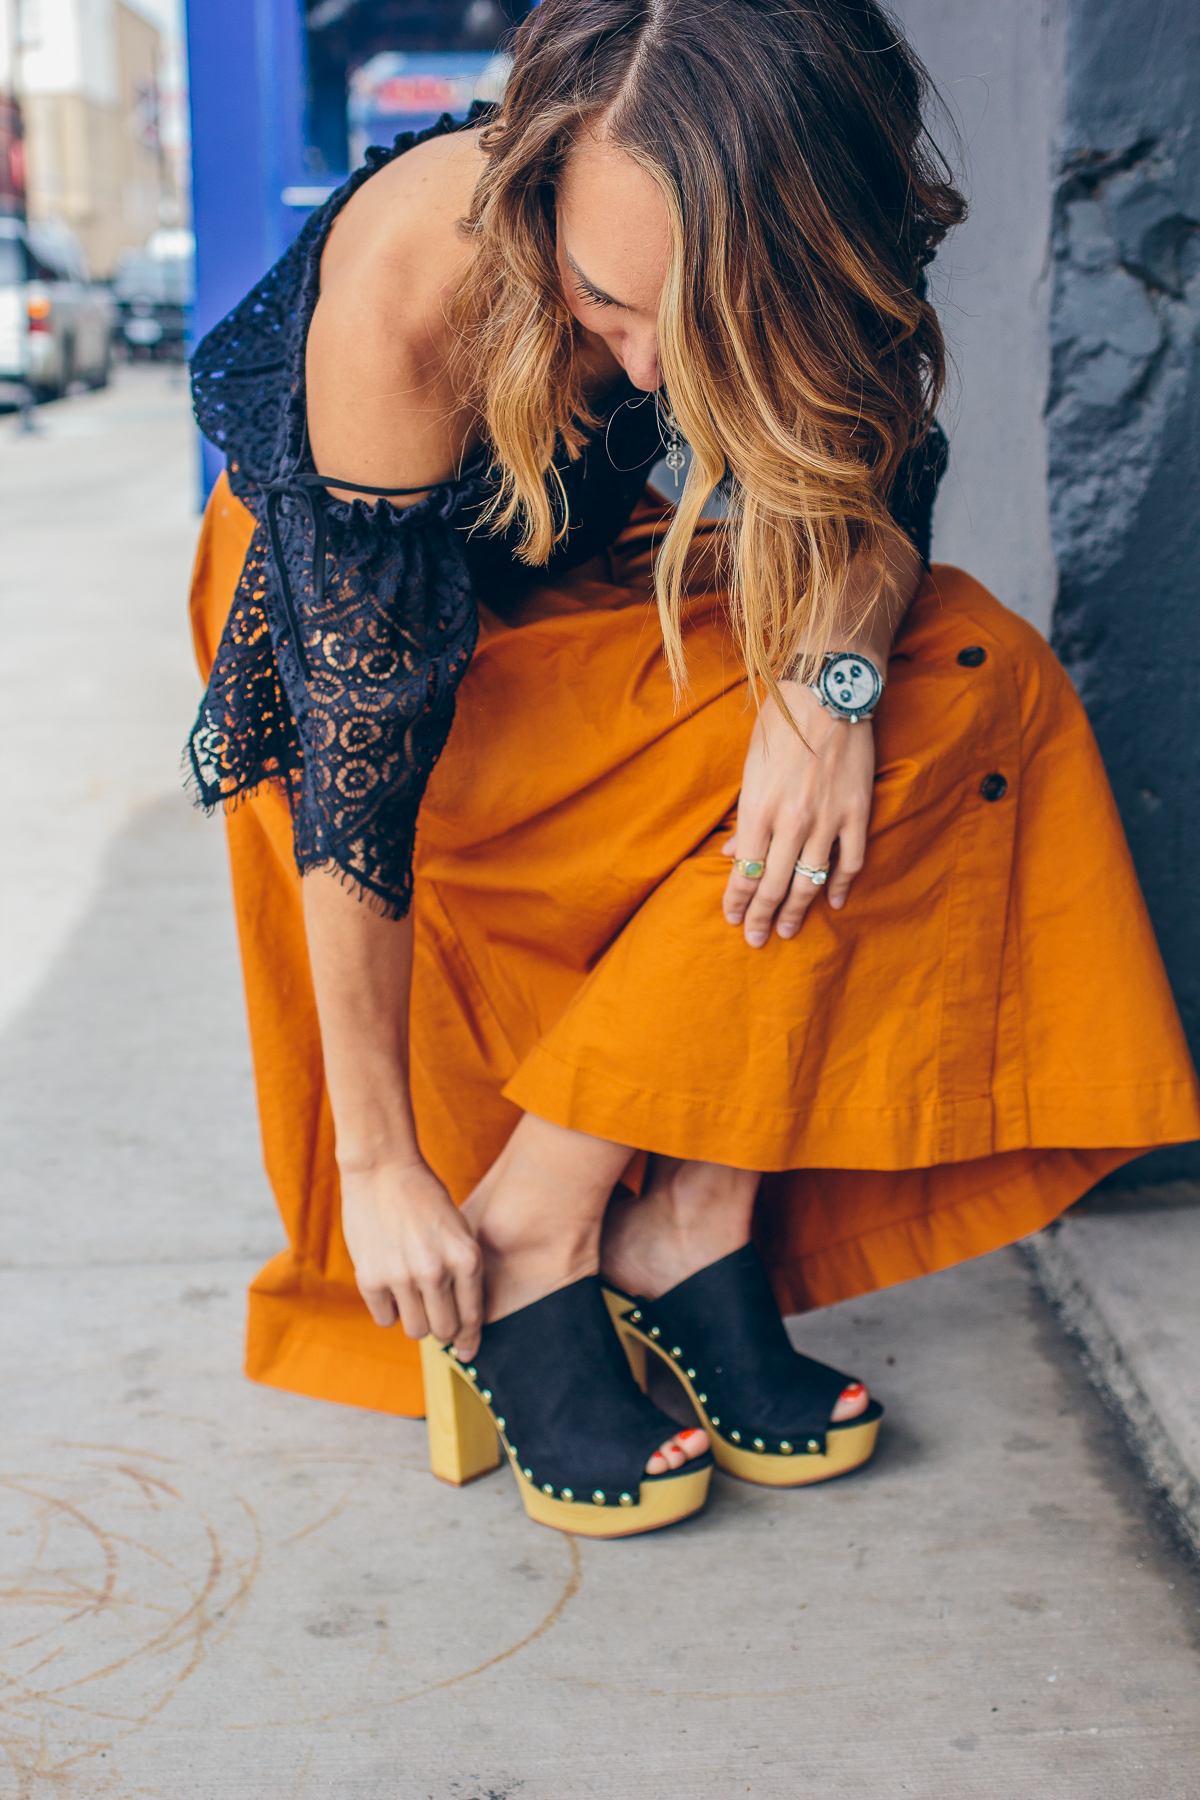 midi skirt, lace off the shoulder top, platform mules, spring outfit idea — via @TheFoxandShe